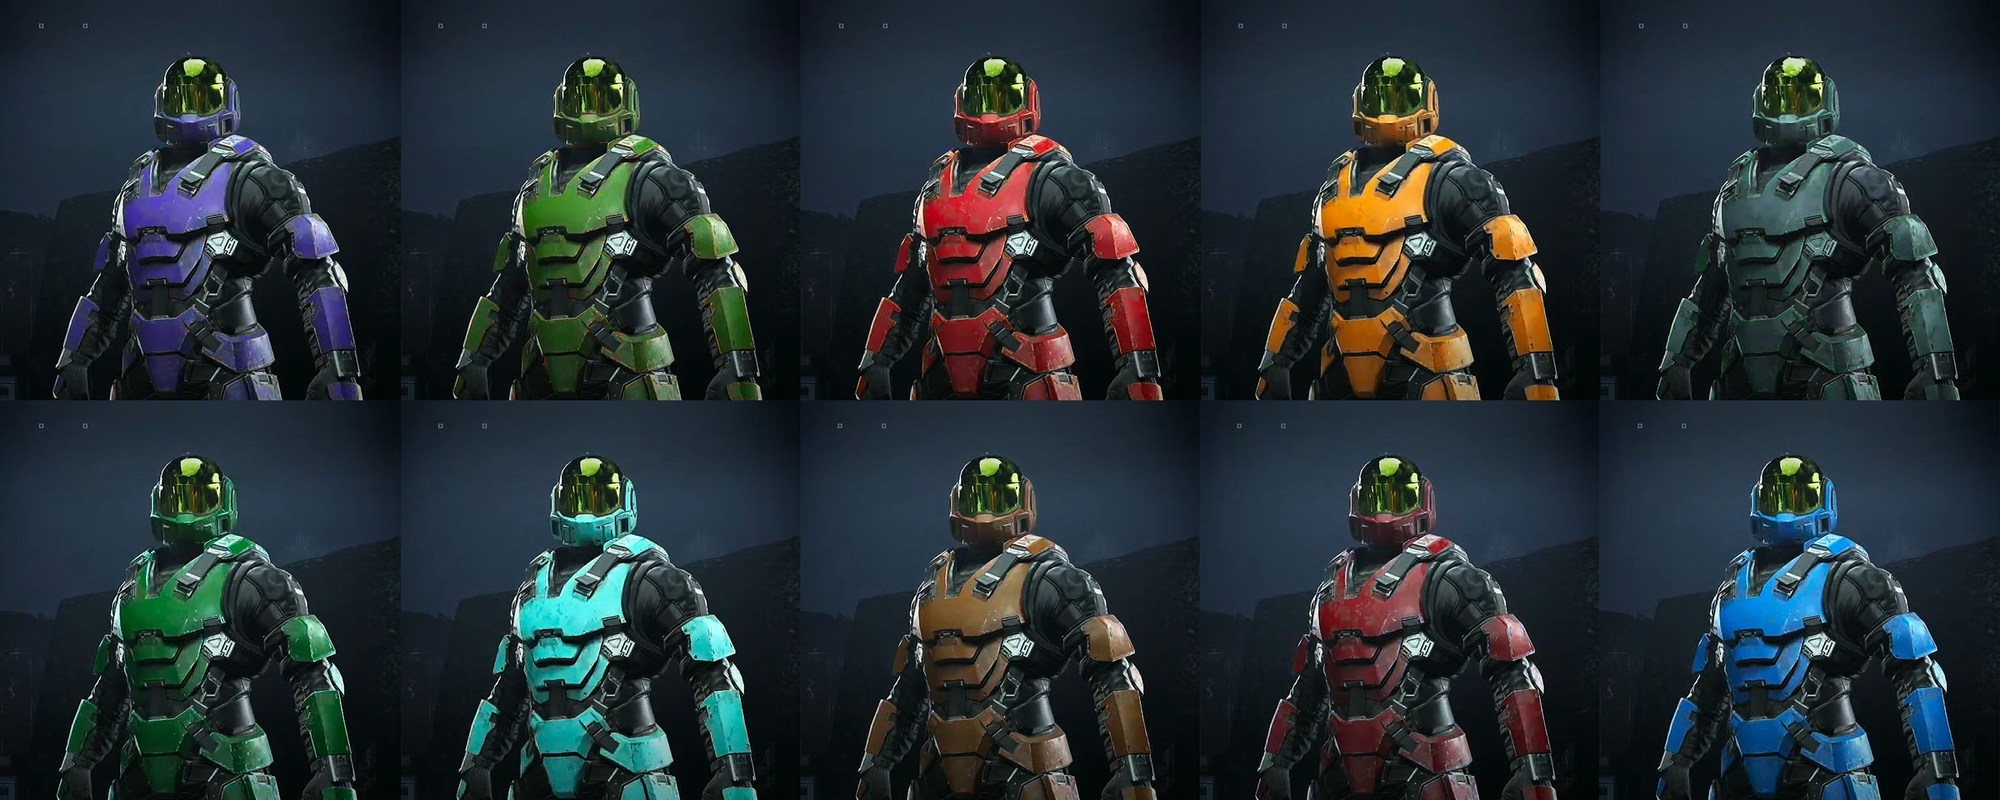 Halo Infinite Armure SPI Mirage Couleurs